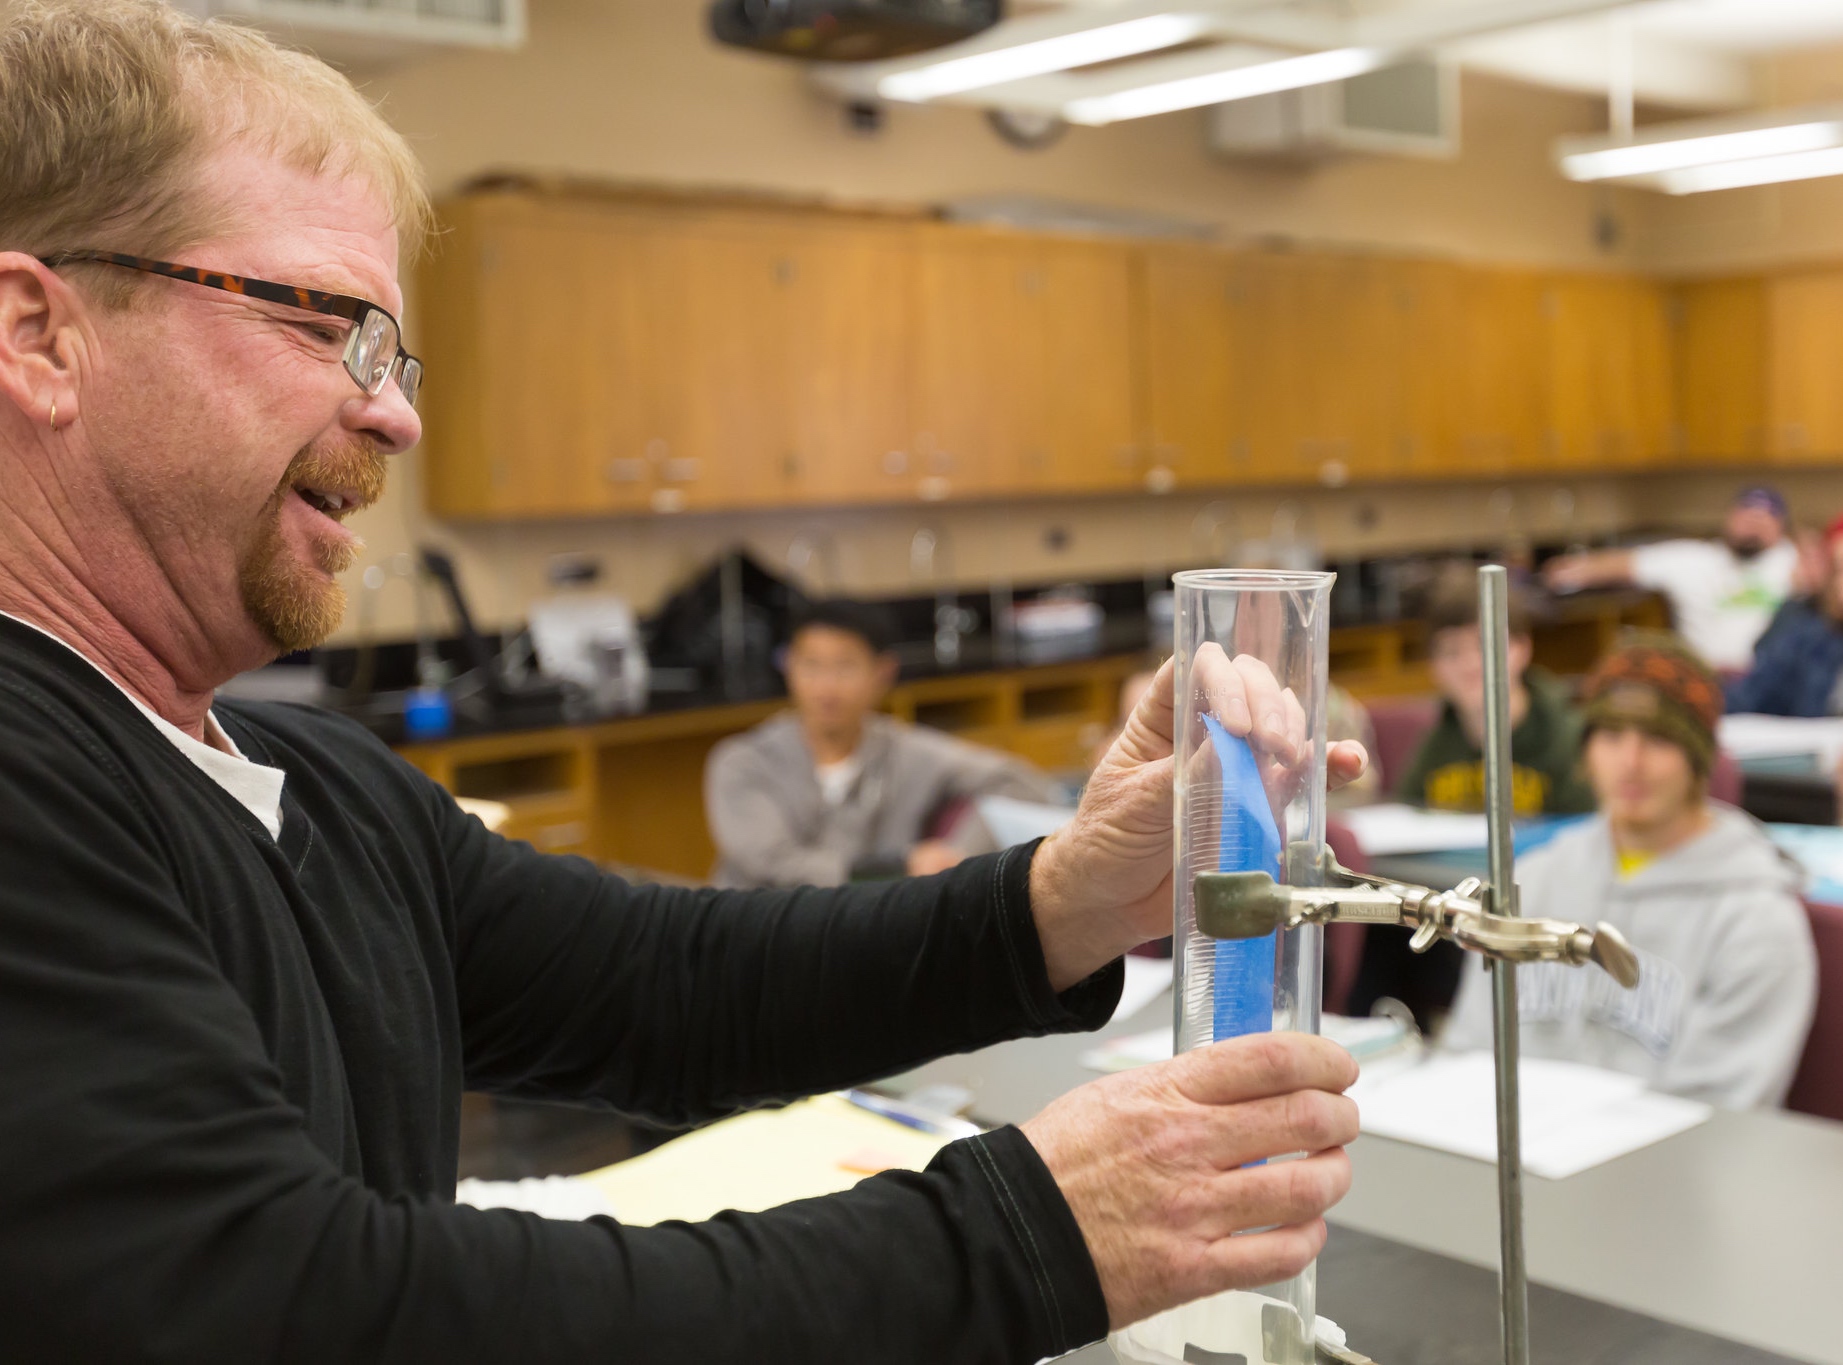 Professor doing experiment with large graduated cylinder.